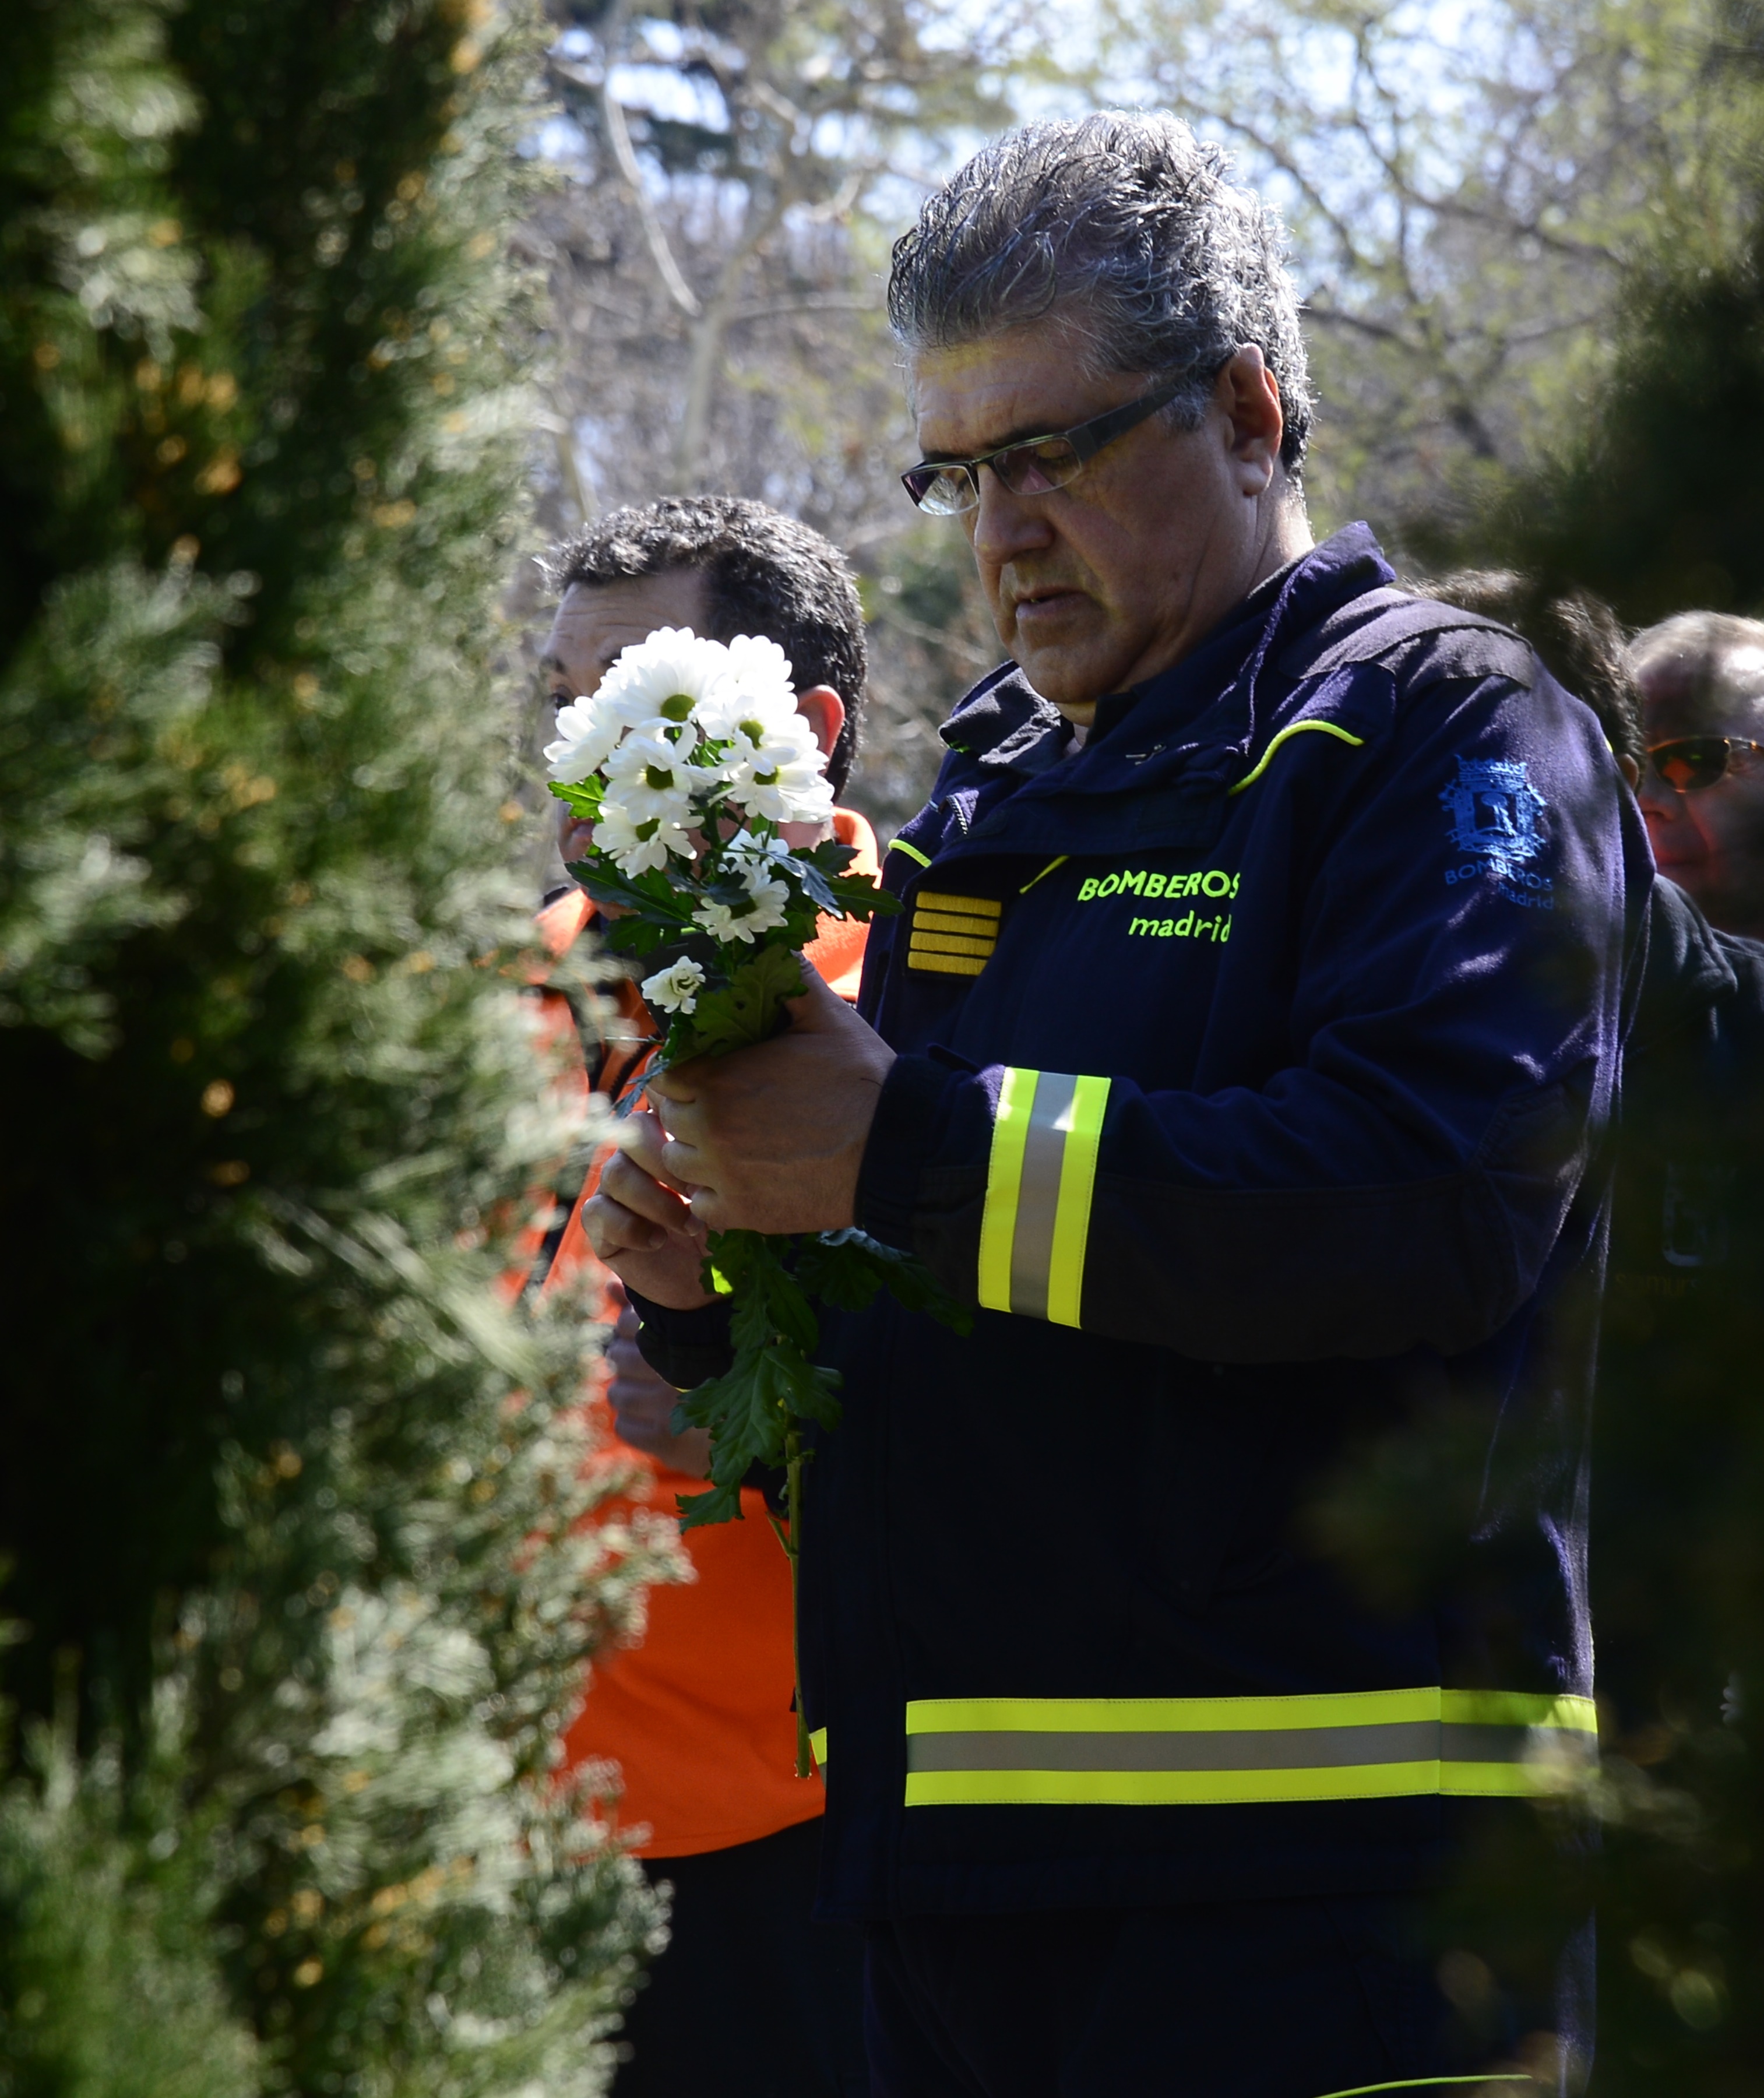 Local Police wait to lays flowers during a commemoration ceremony in held in the Rememberance Garden of Madrid's Retiro Park on March 11, 2014 (JAVIER SORIANO&mdash;AFP/Getty Images)